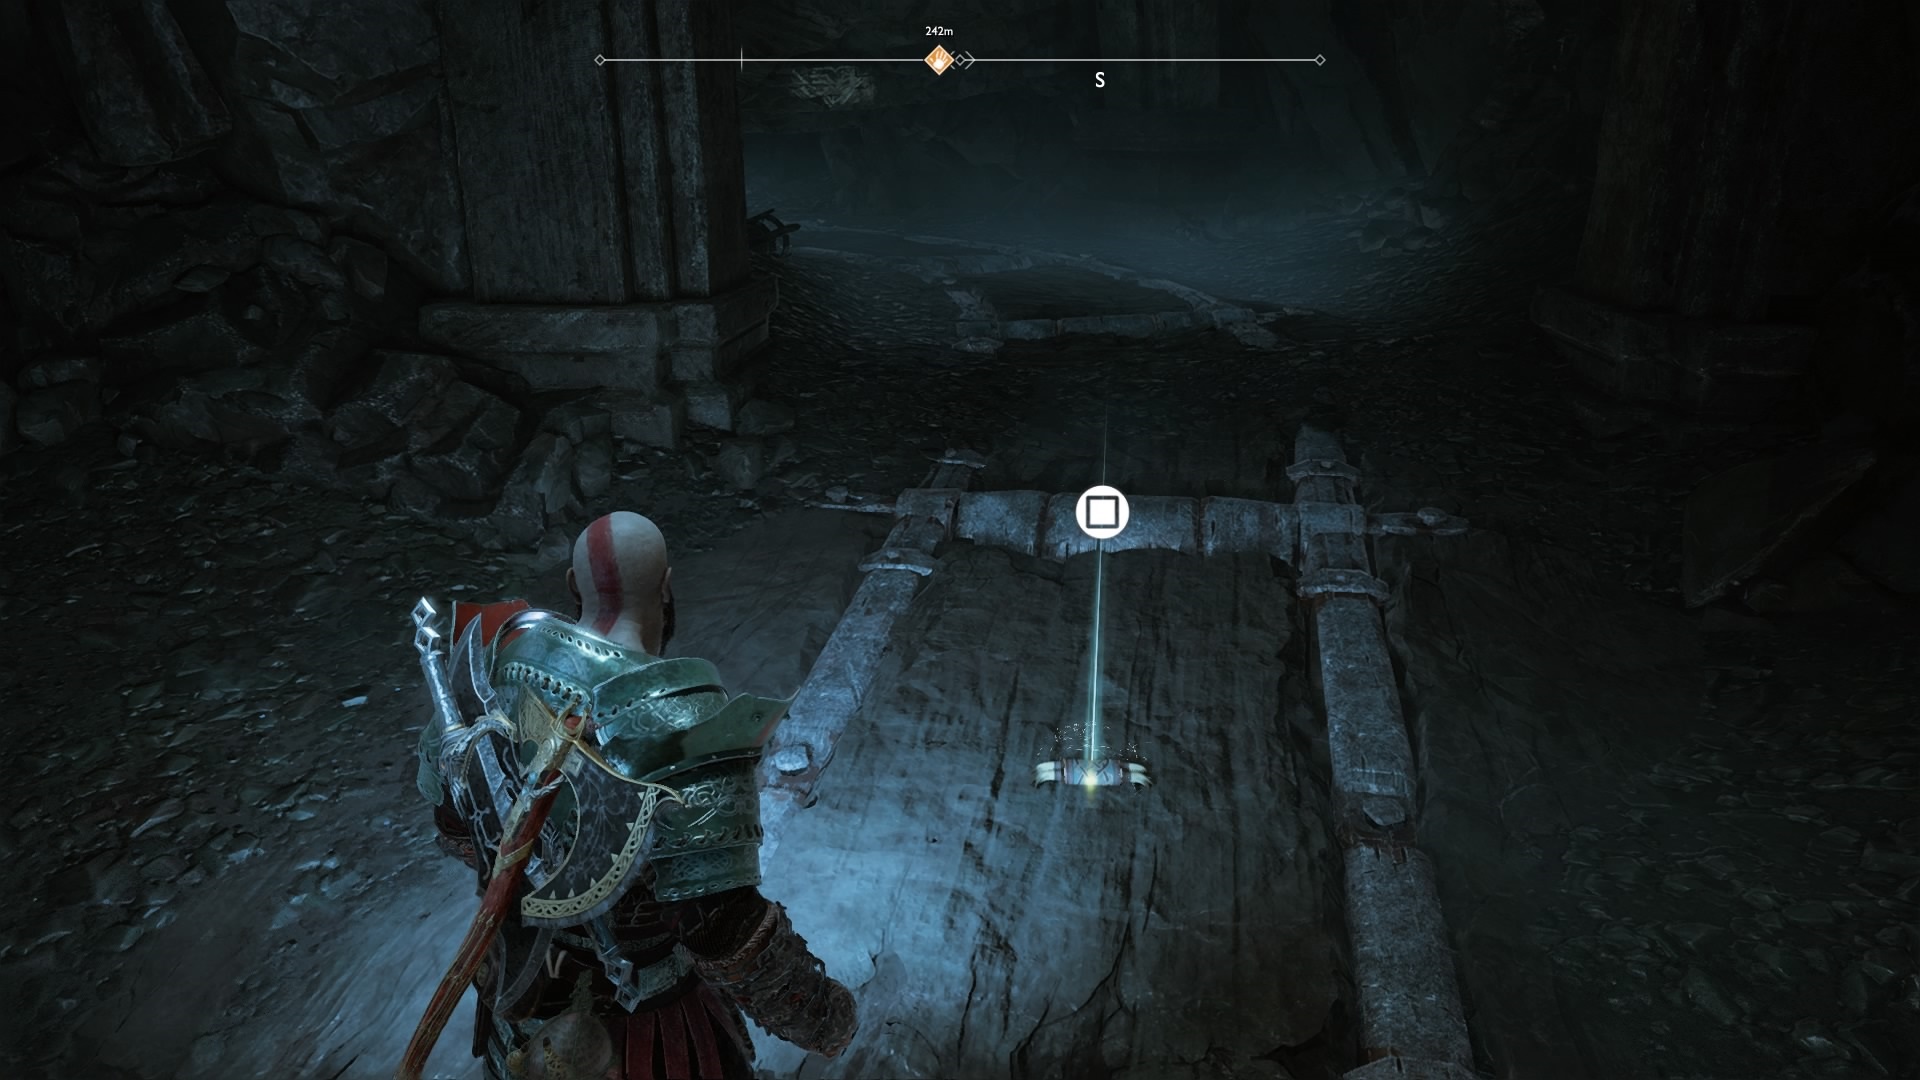 god of war treasure map collectibles guide the last place they'd look 1